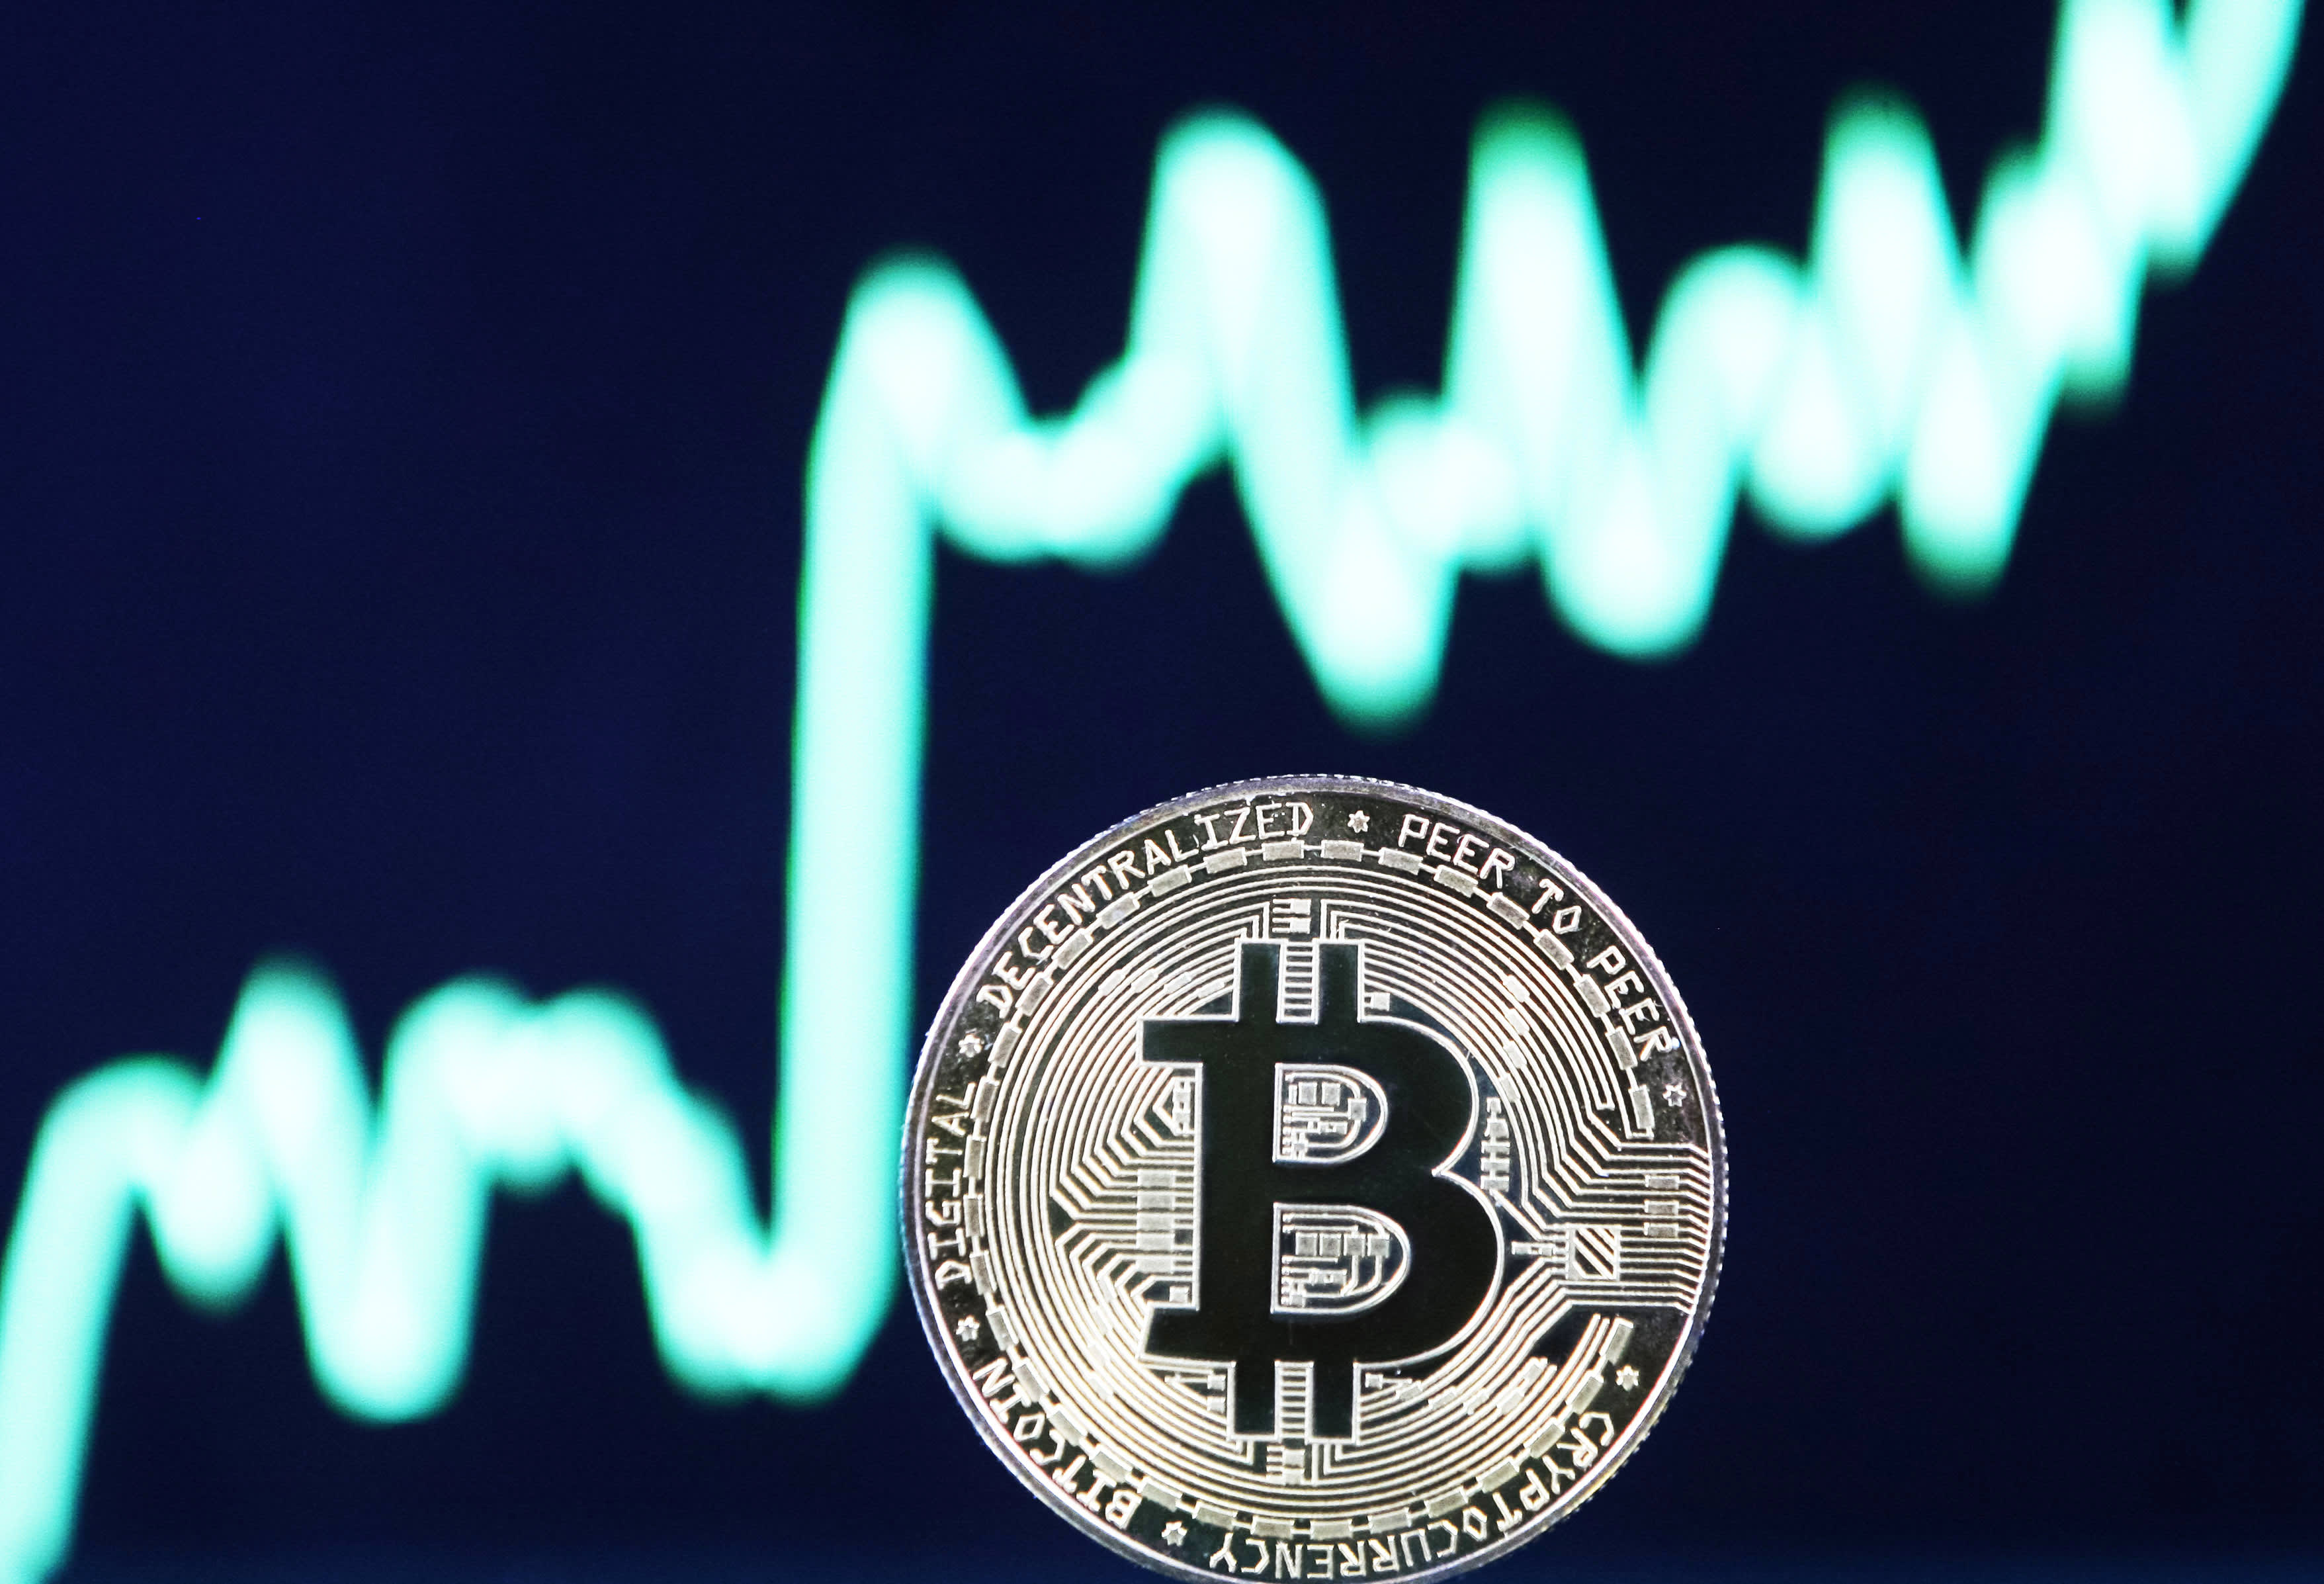 Bitcoin jumps to new record high above $66,000 after landmark U.S. ETF launch